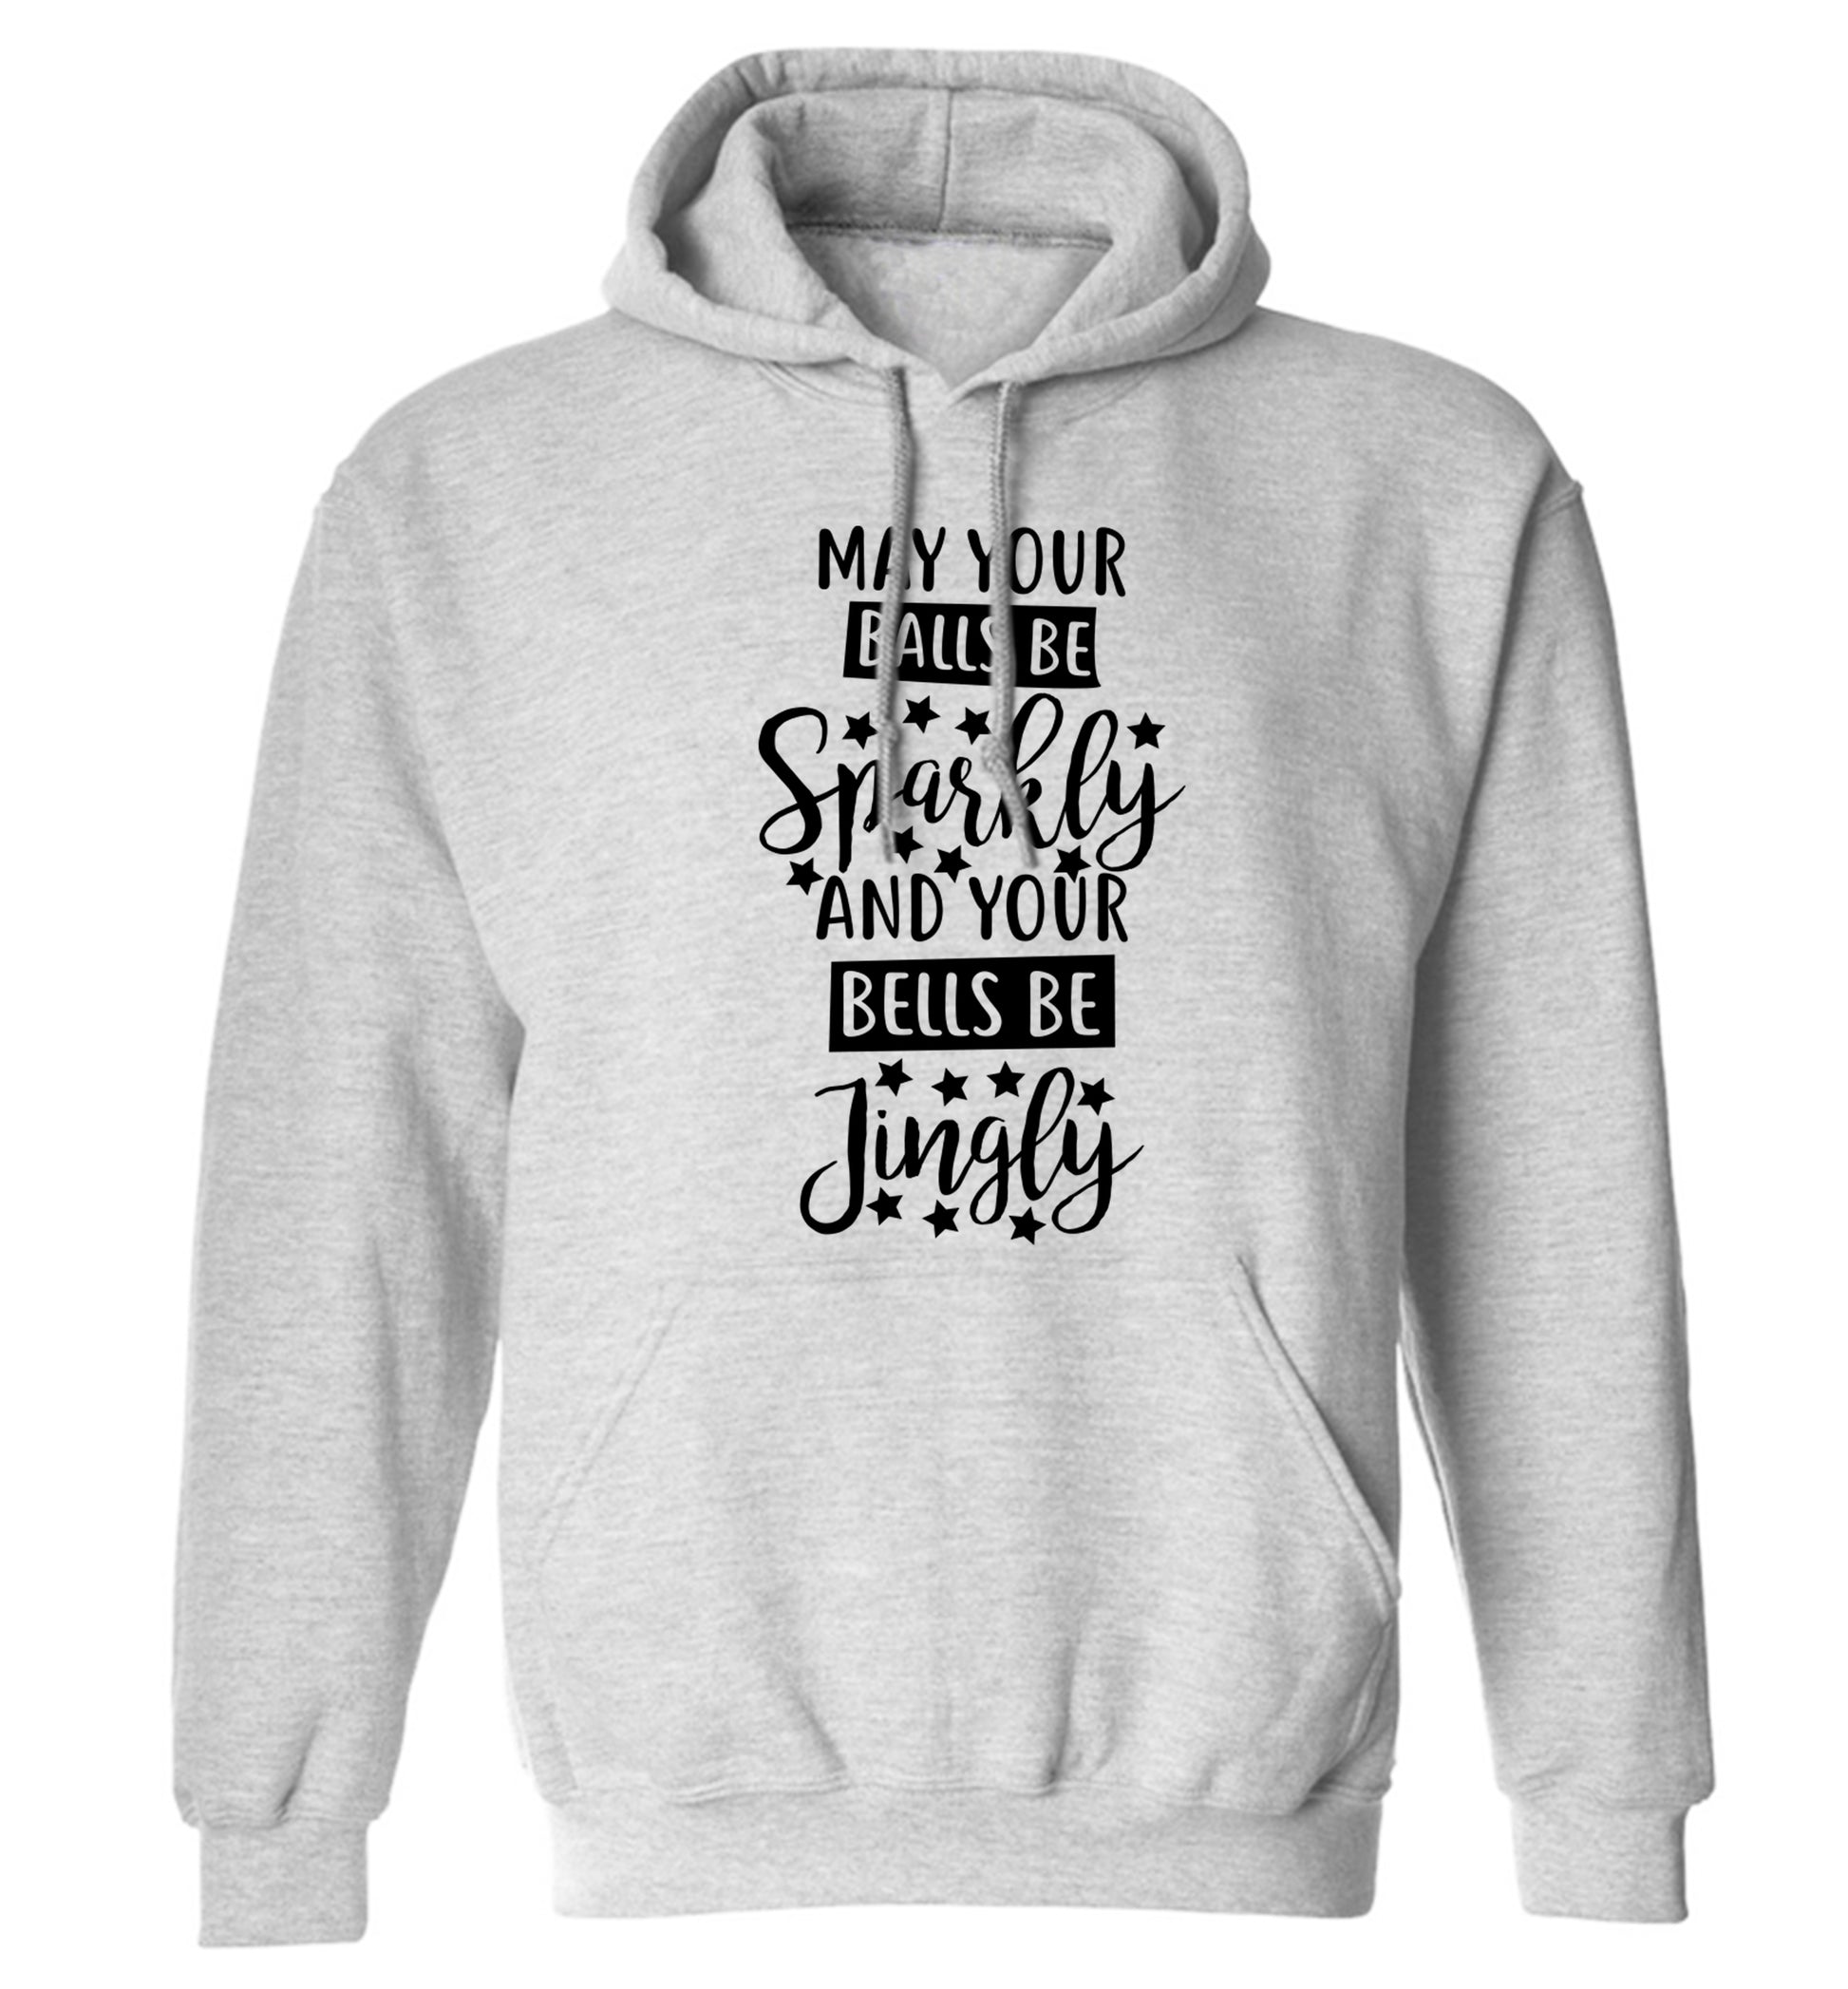 May your balls be sparkly and your bells be jingly adults unisex grey hoodie 2XL